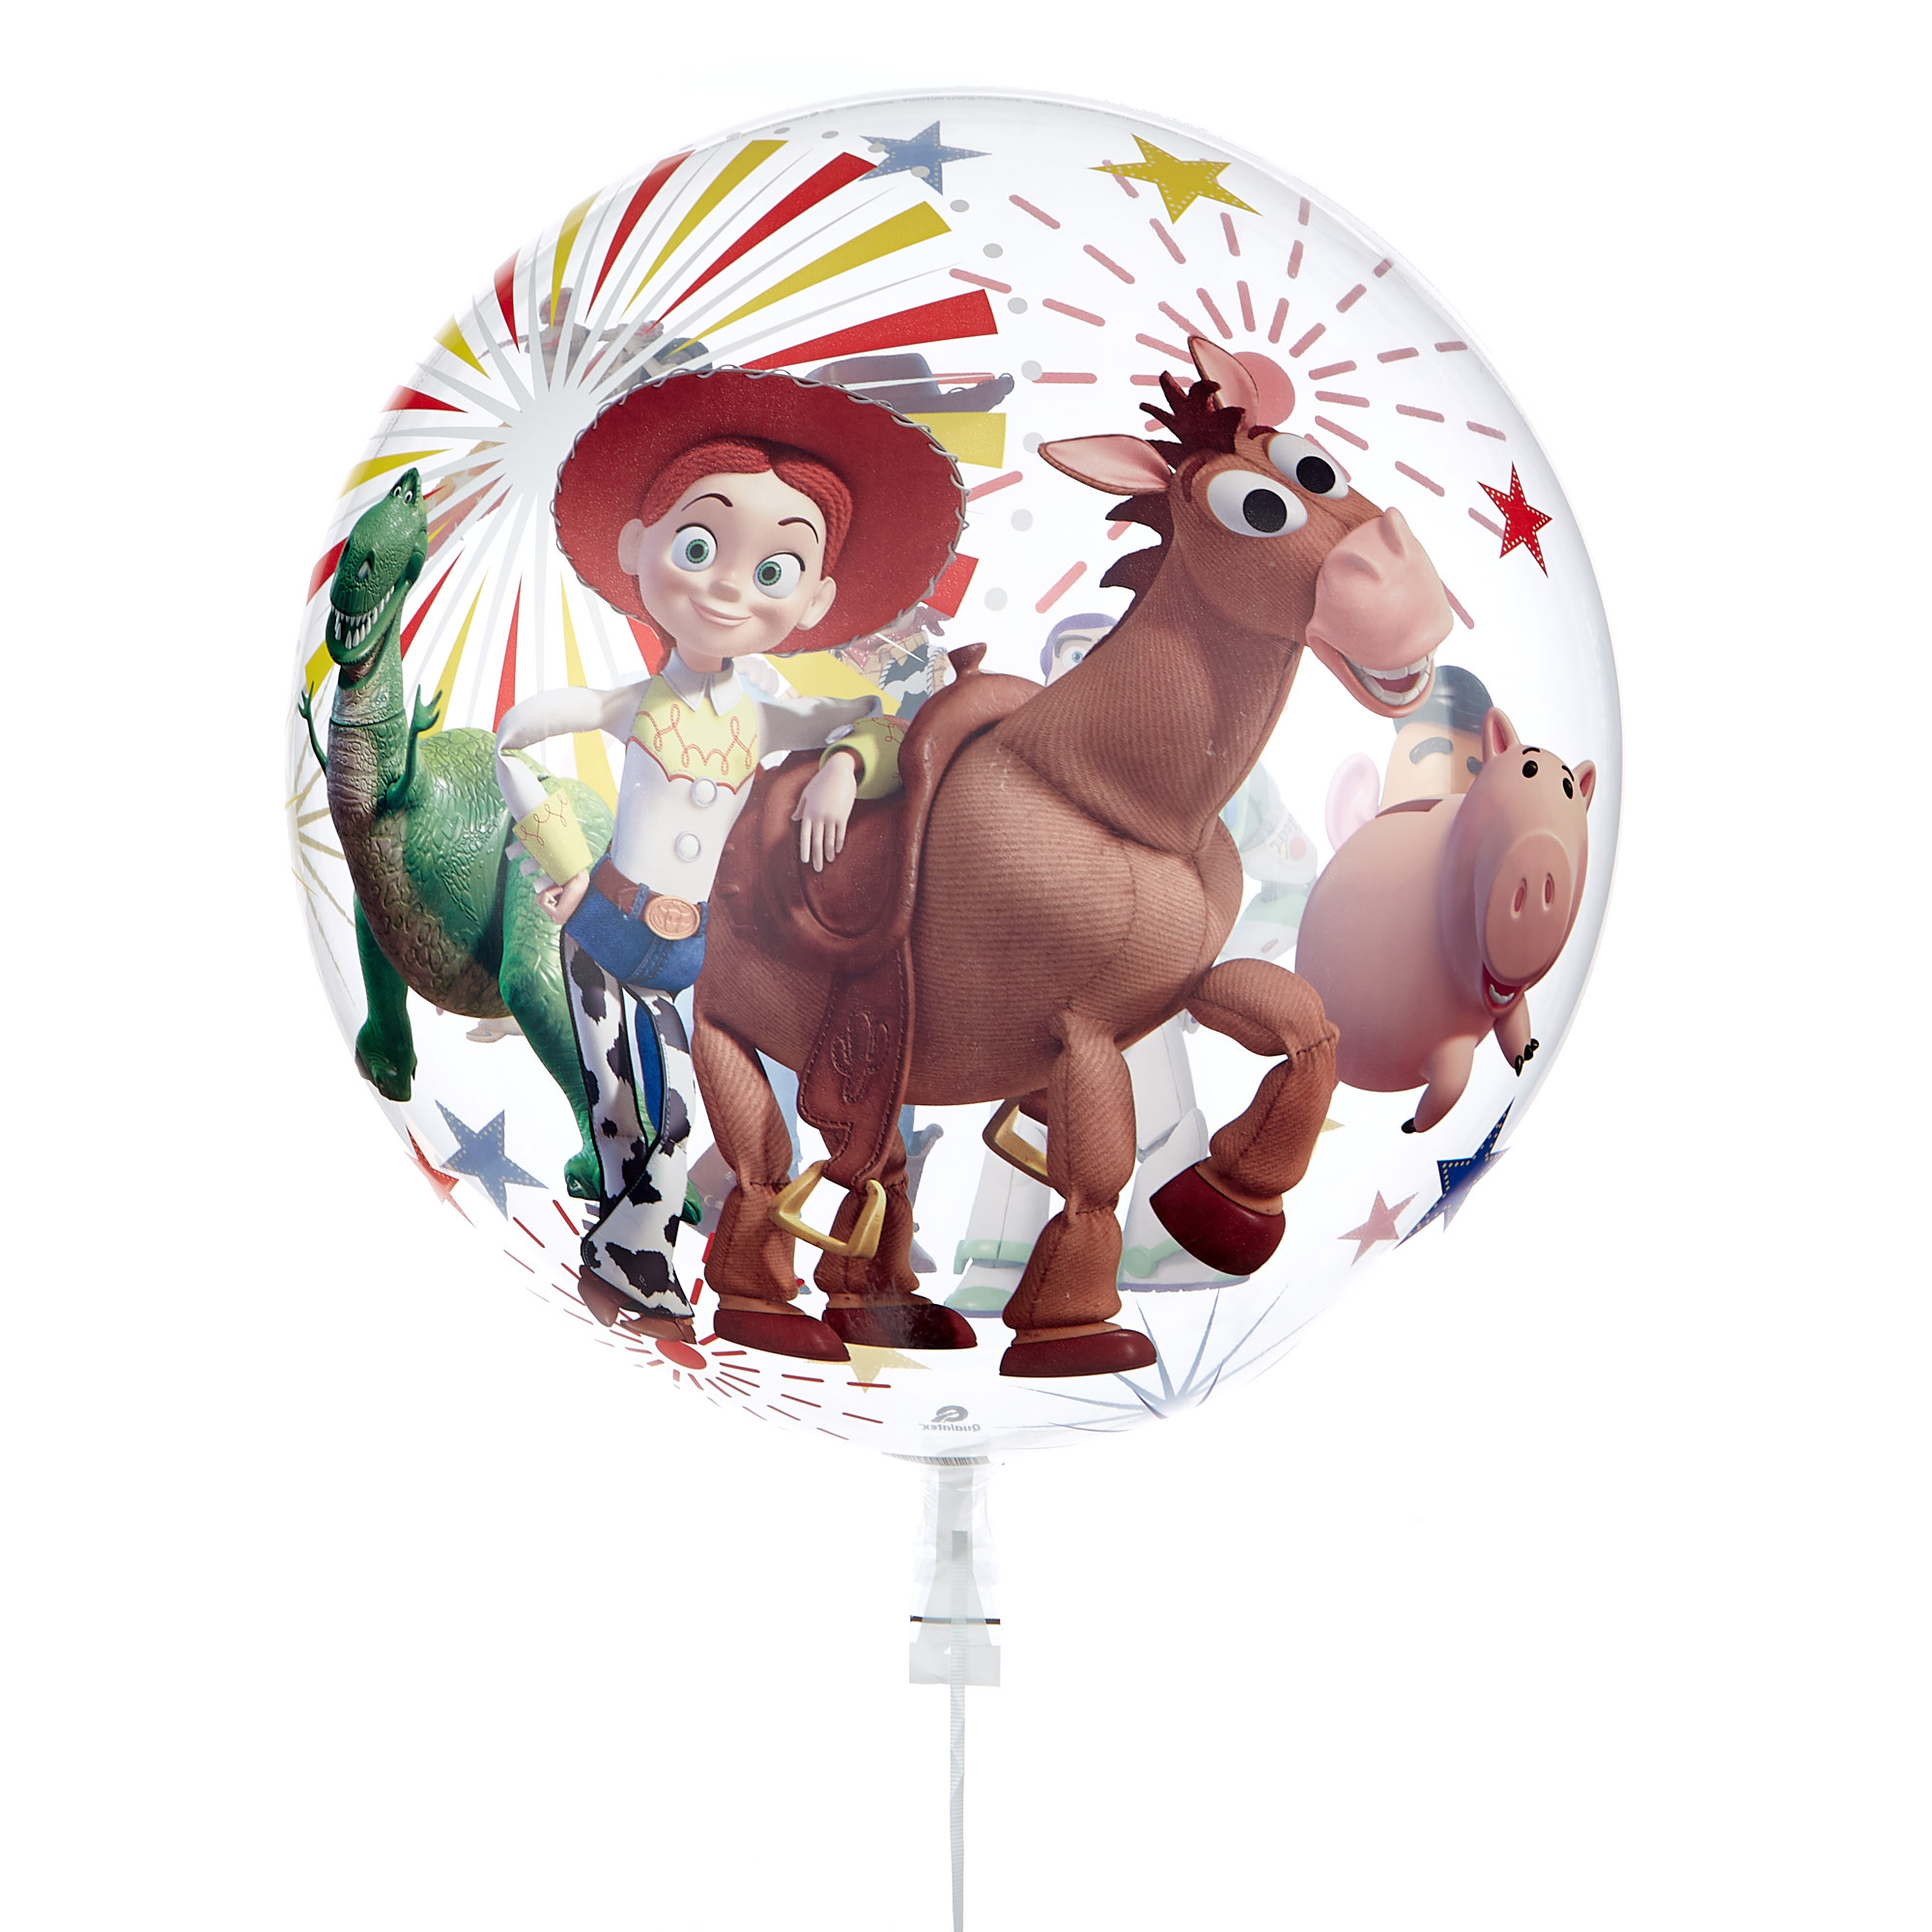 22-Inch Bubble Balloon - Toy Story 4 - DELIVERED INFLATED!